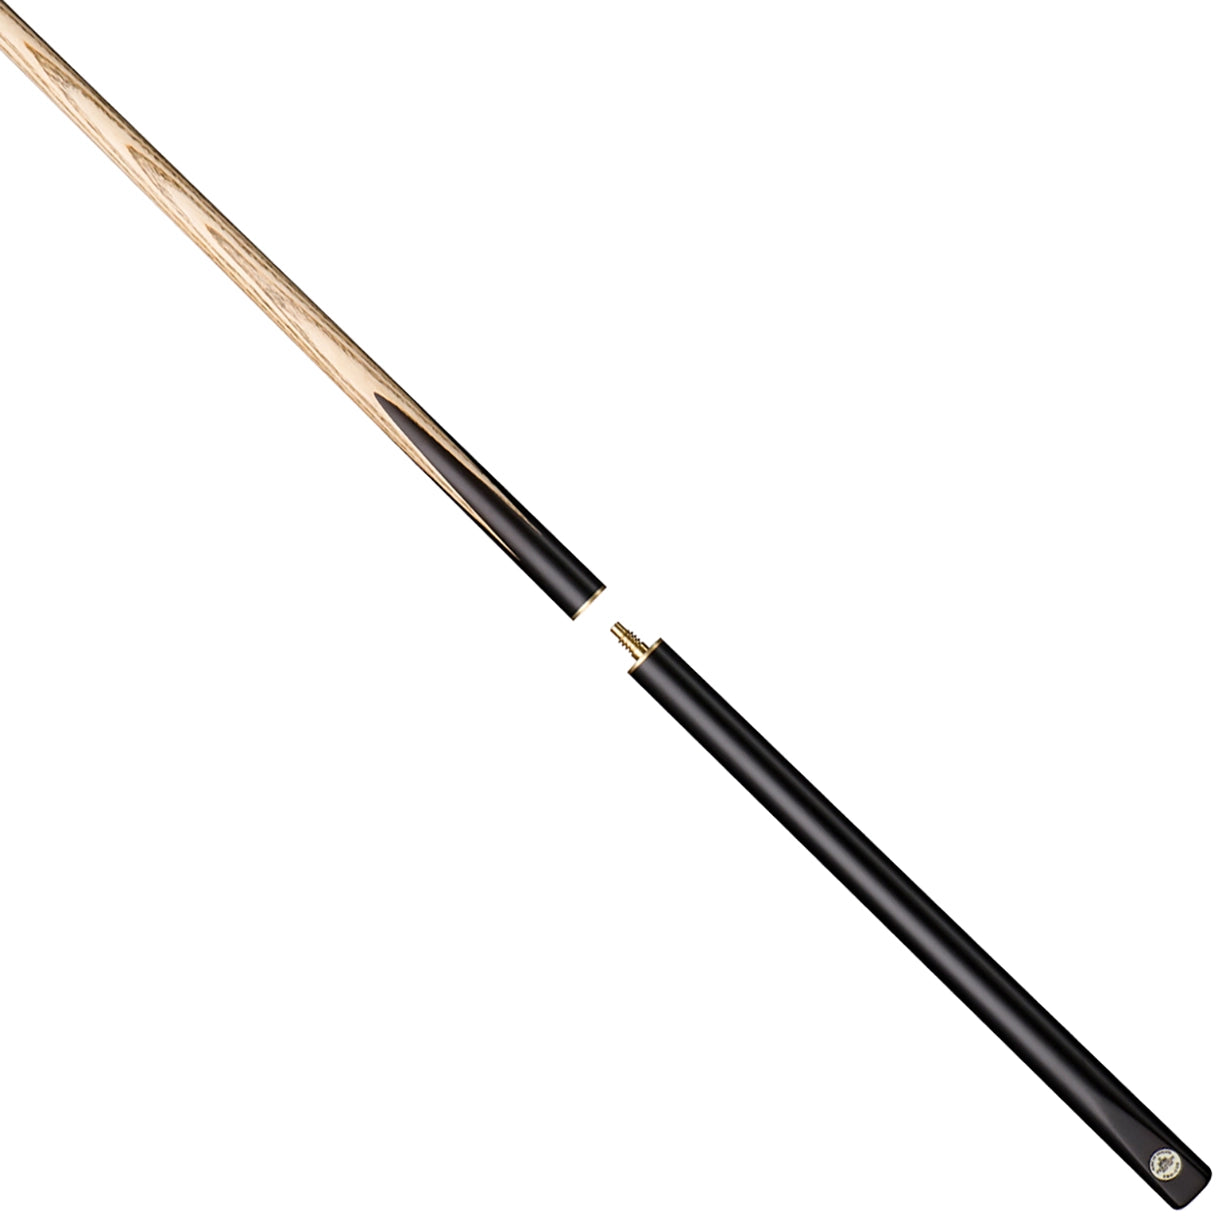 Peradon Pro-Cue 3/4 Jointed Snooker Cue. Seperated view